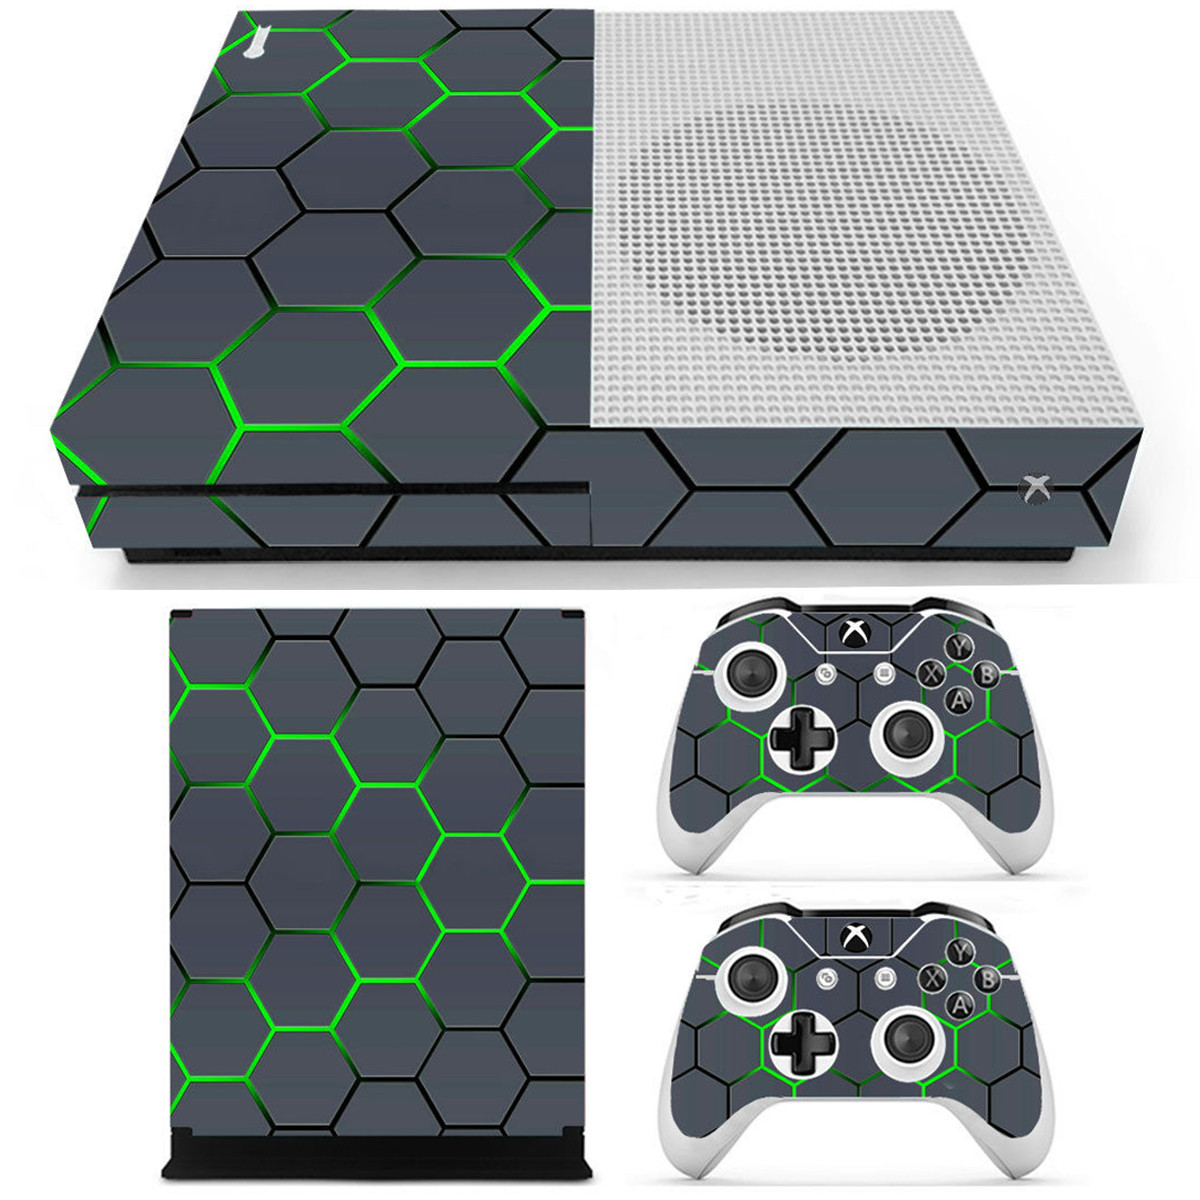 Green Grid Vinyl Decal Skin Stickers Cover for Xbox One S Game Console&2 Controllers 33